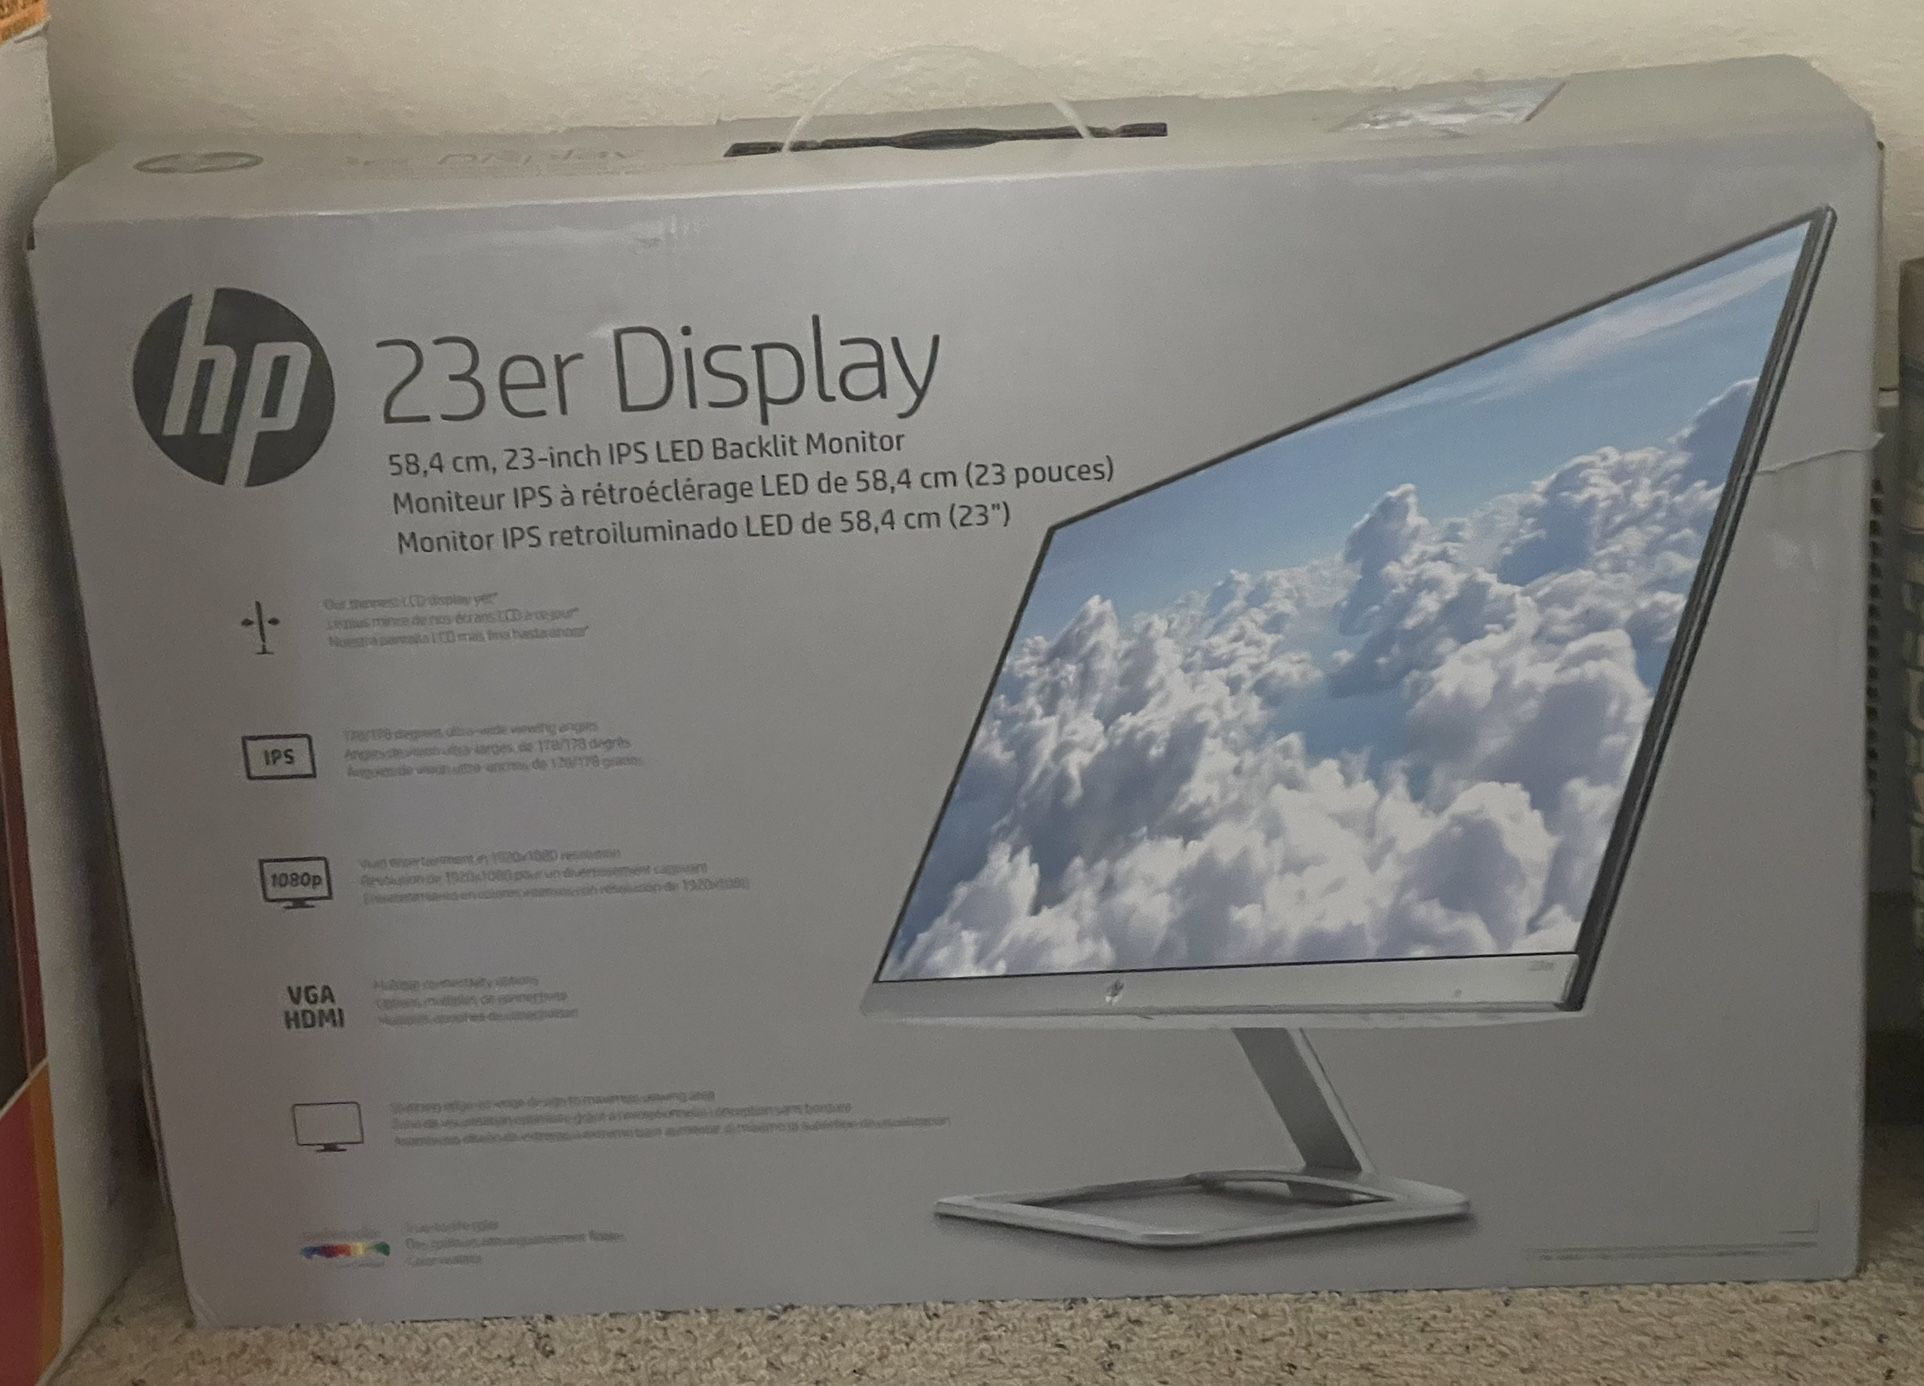 New 23 Inch IPS backlit LED HP monitor